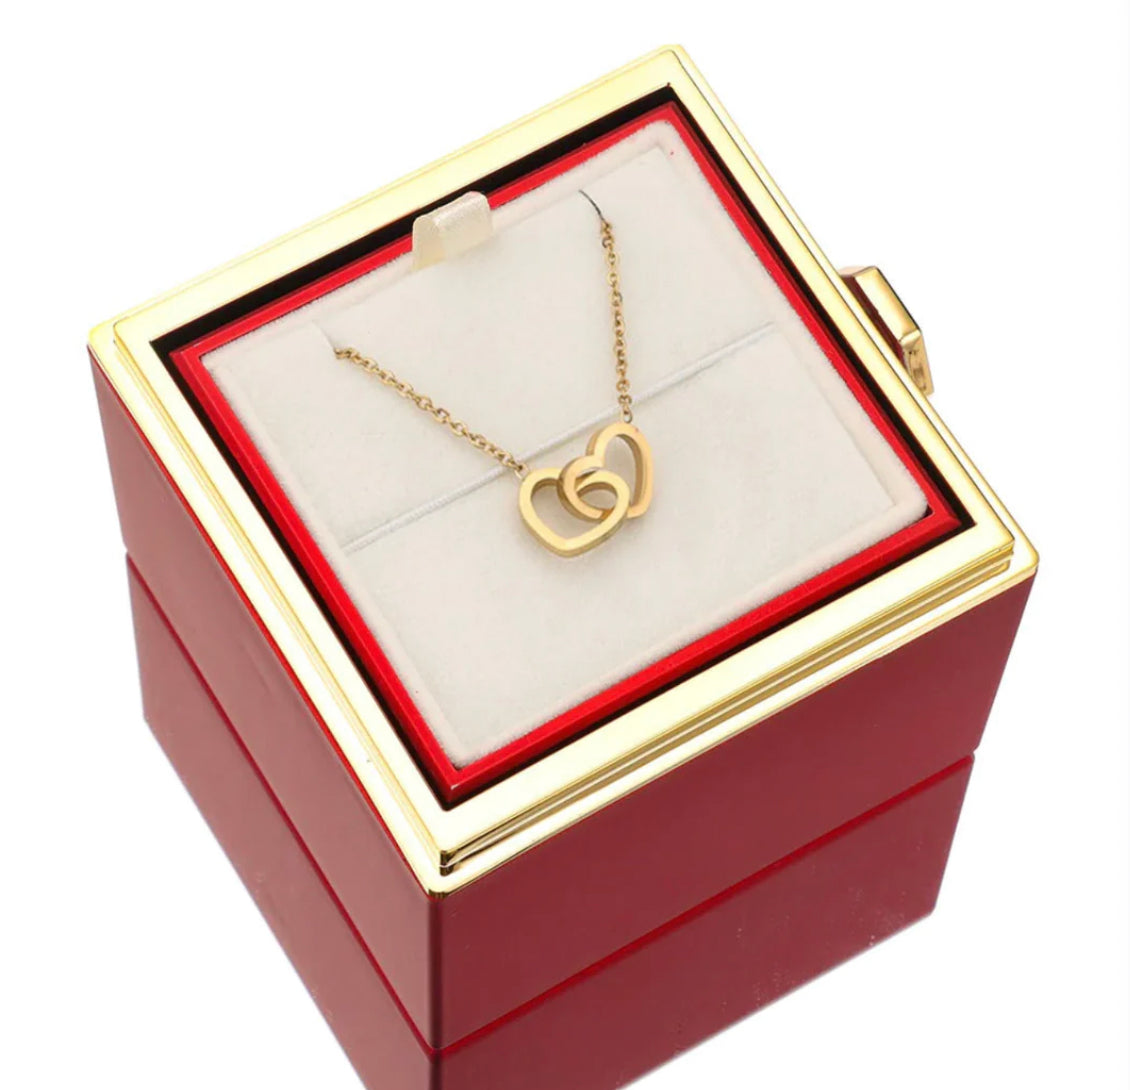 Eternal Rose Box- W/ Engraved Necklace & Real Rose